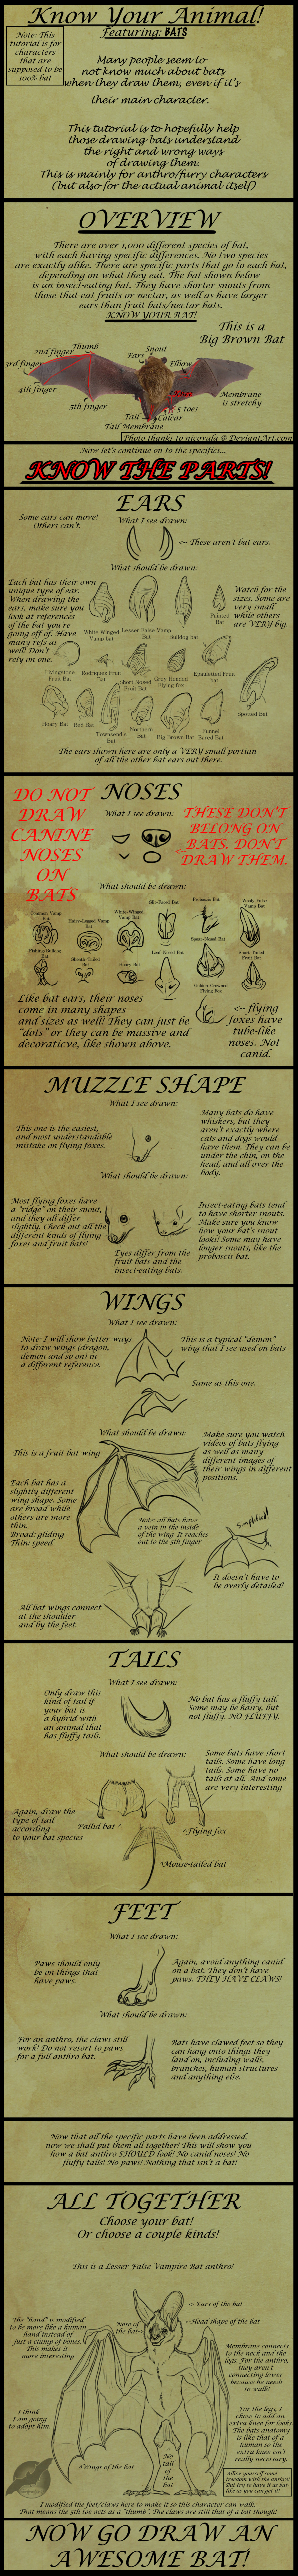 anthro bat bat_wings big_brown_bat digitigrade featureless_crotch feral flying_fox free-tailed_bat how-to leaf_nose mammal membranous_wings patagium plagiopatagium realistic_wings shorty-antics-27 the_more_you_know uropatagium vampire_bat winged_arms wings